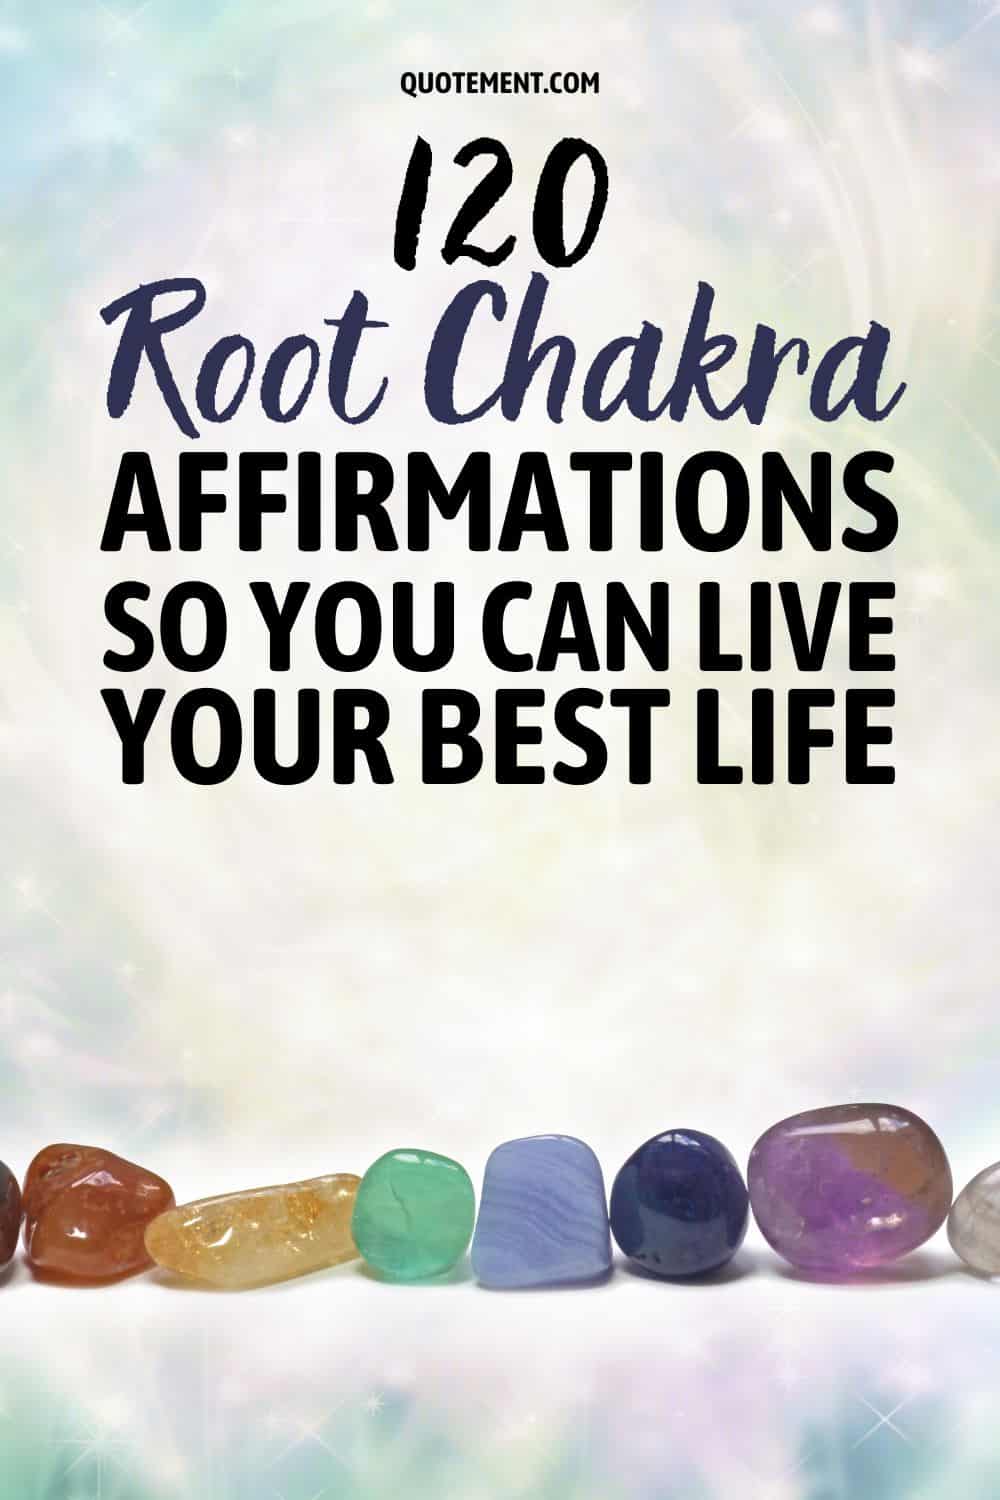 120 Root Chakra Affirmations So You Can Live Your Best Life
